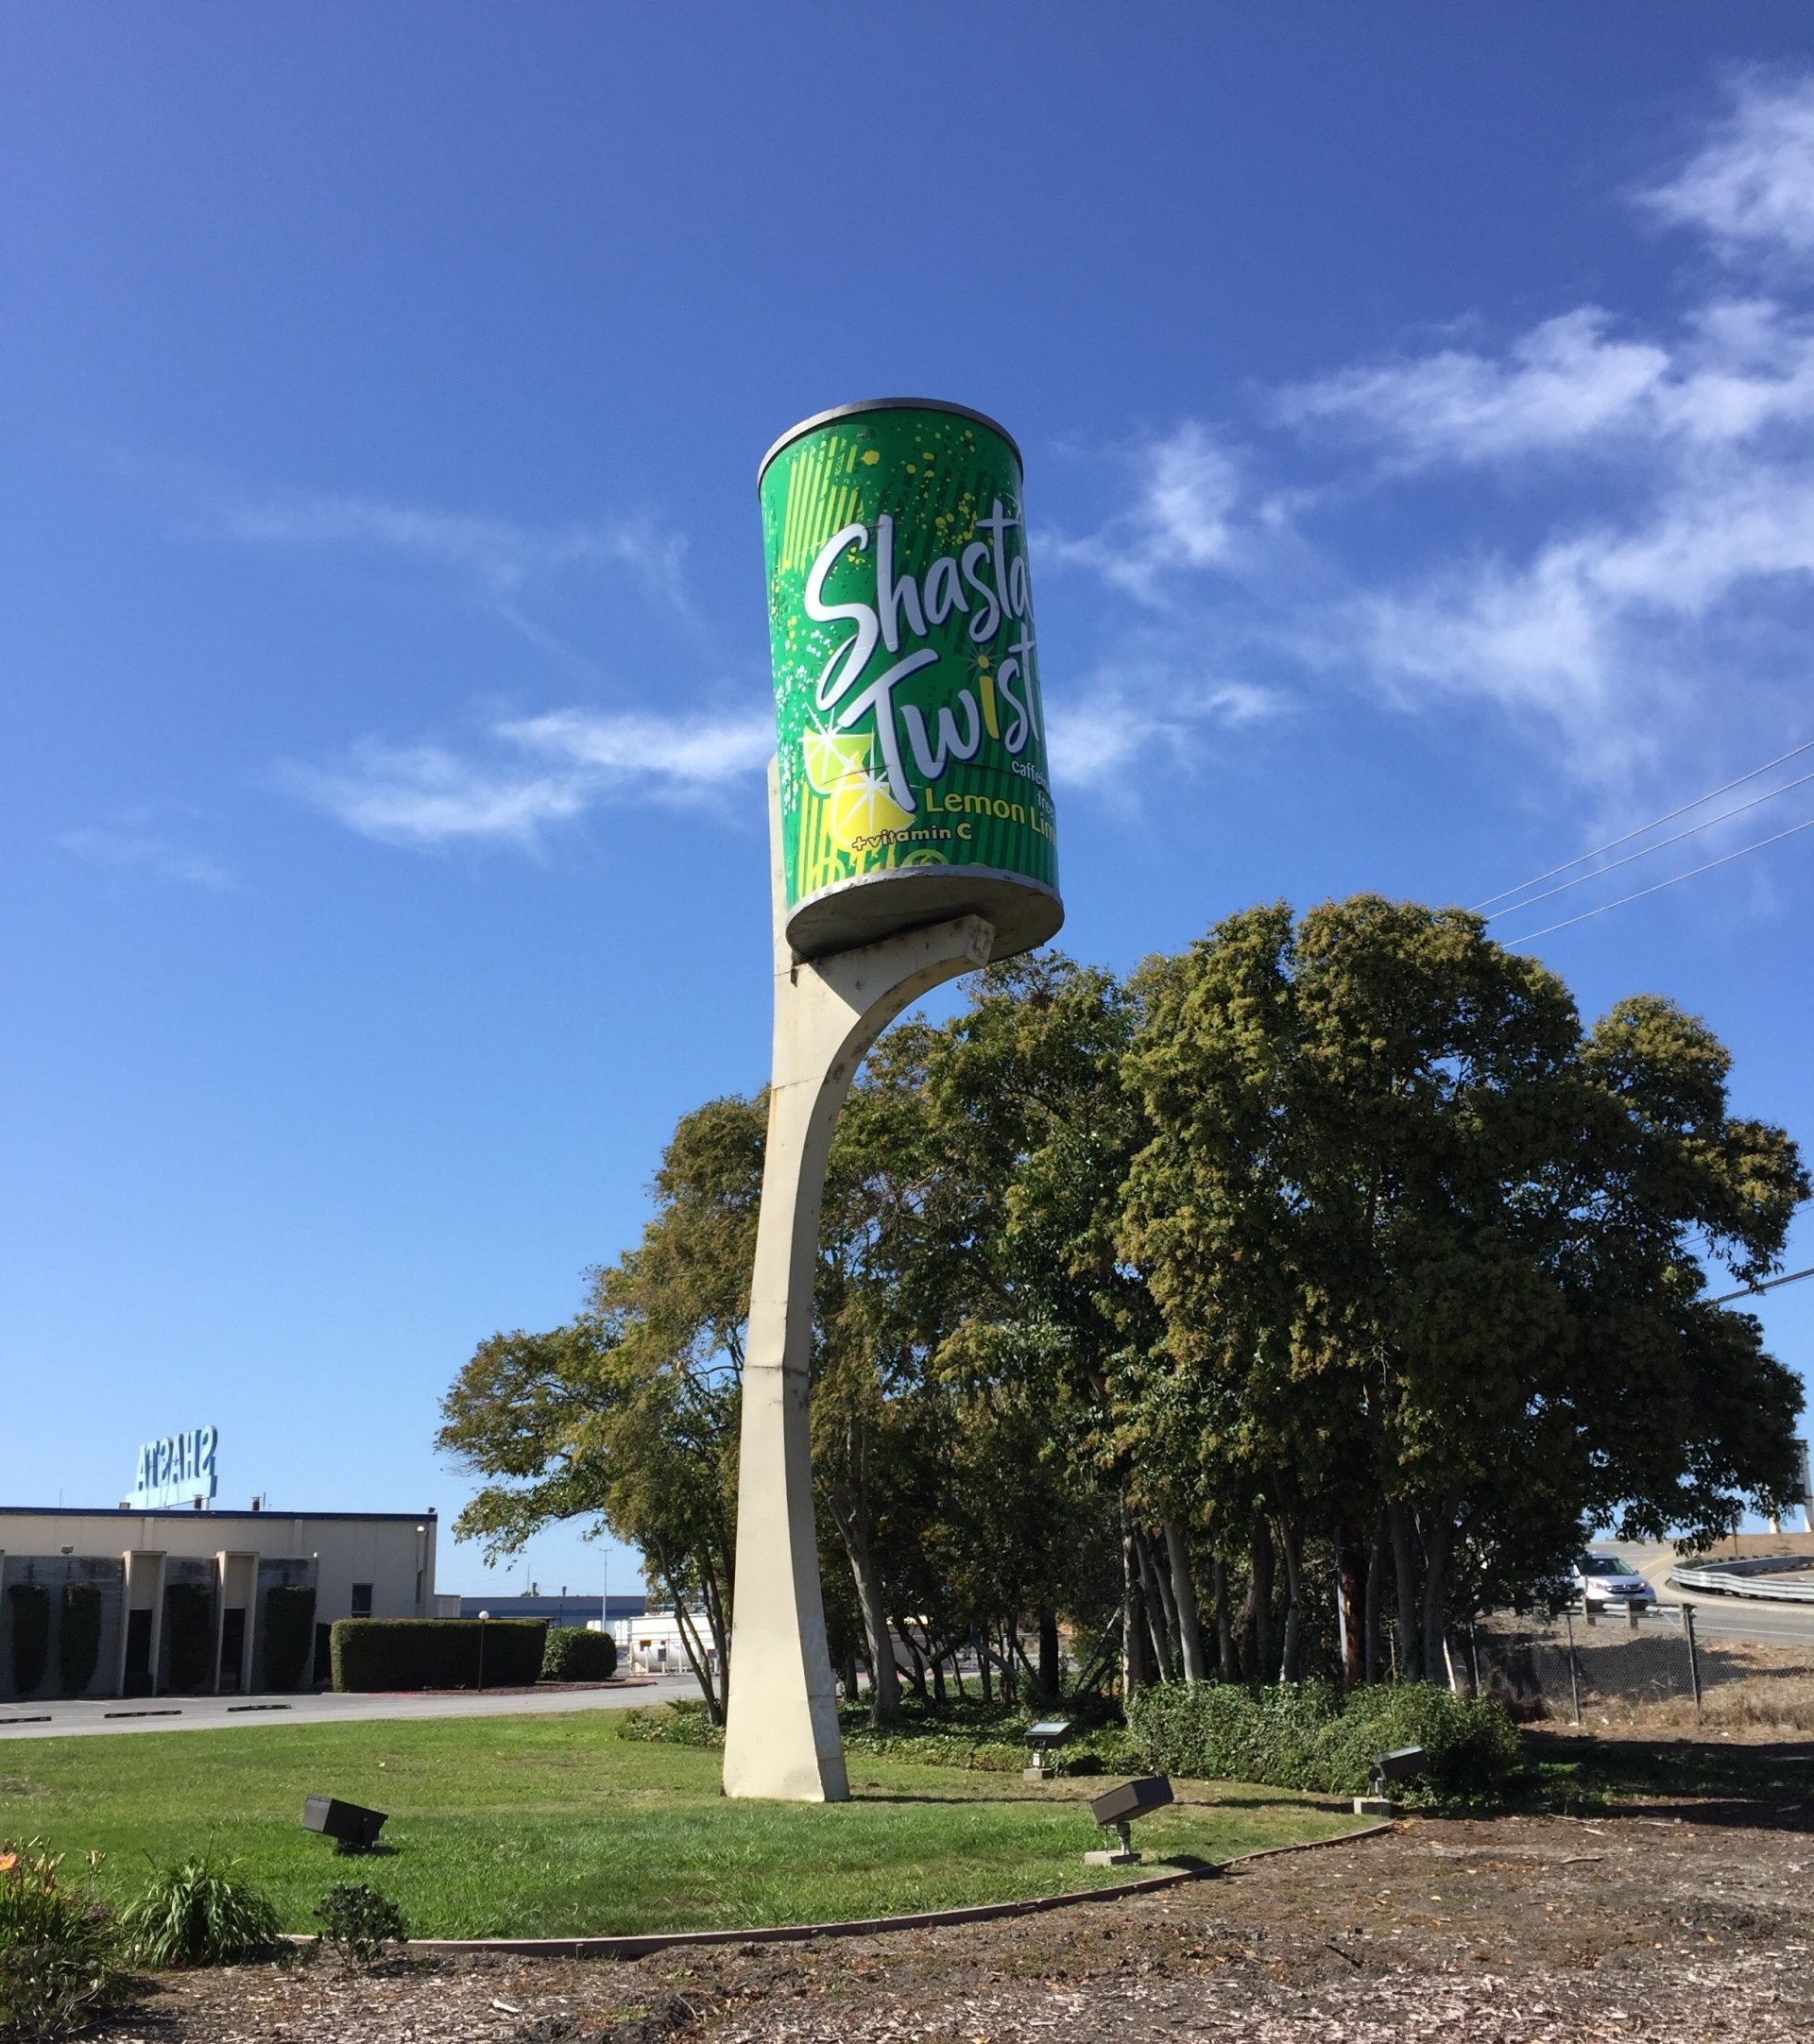 World's Largest Shasta Soda Cans Sculptures: world record in Hayward, California